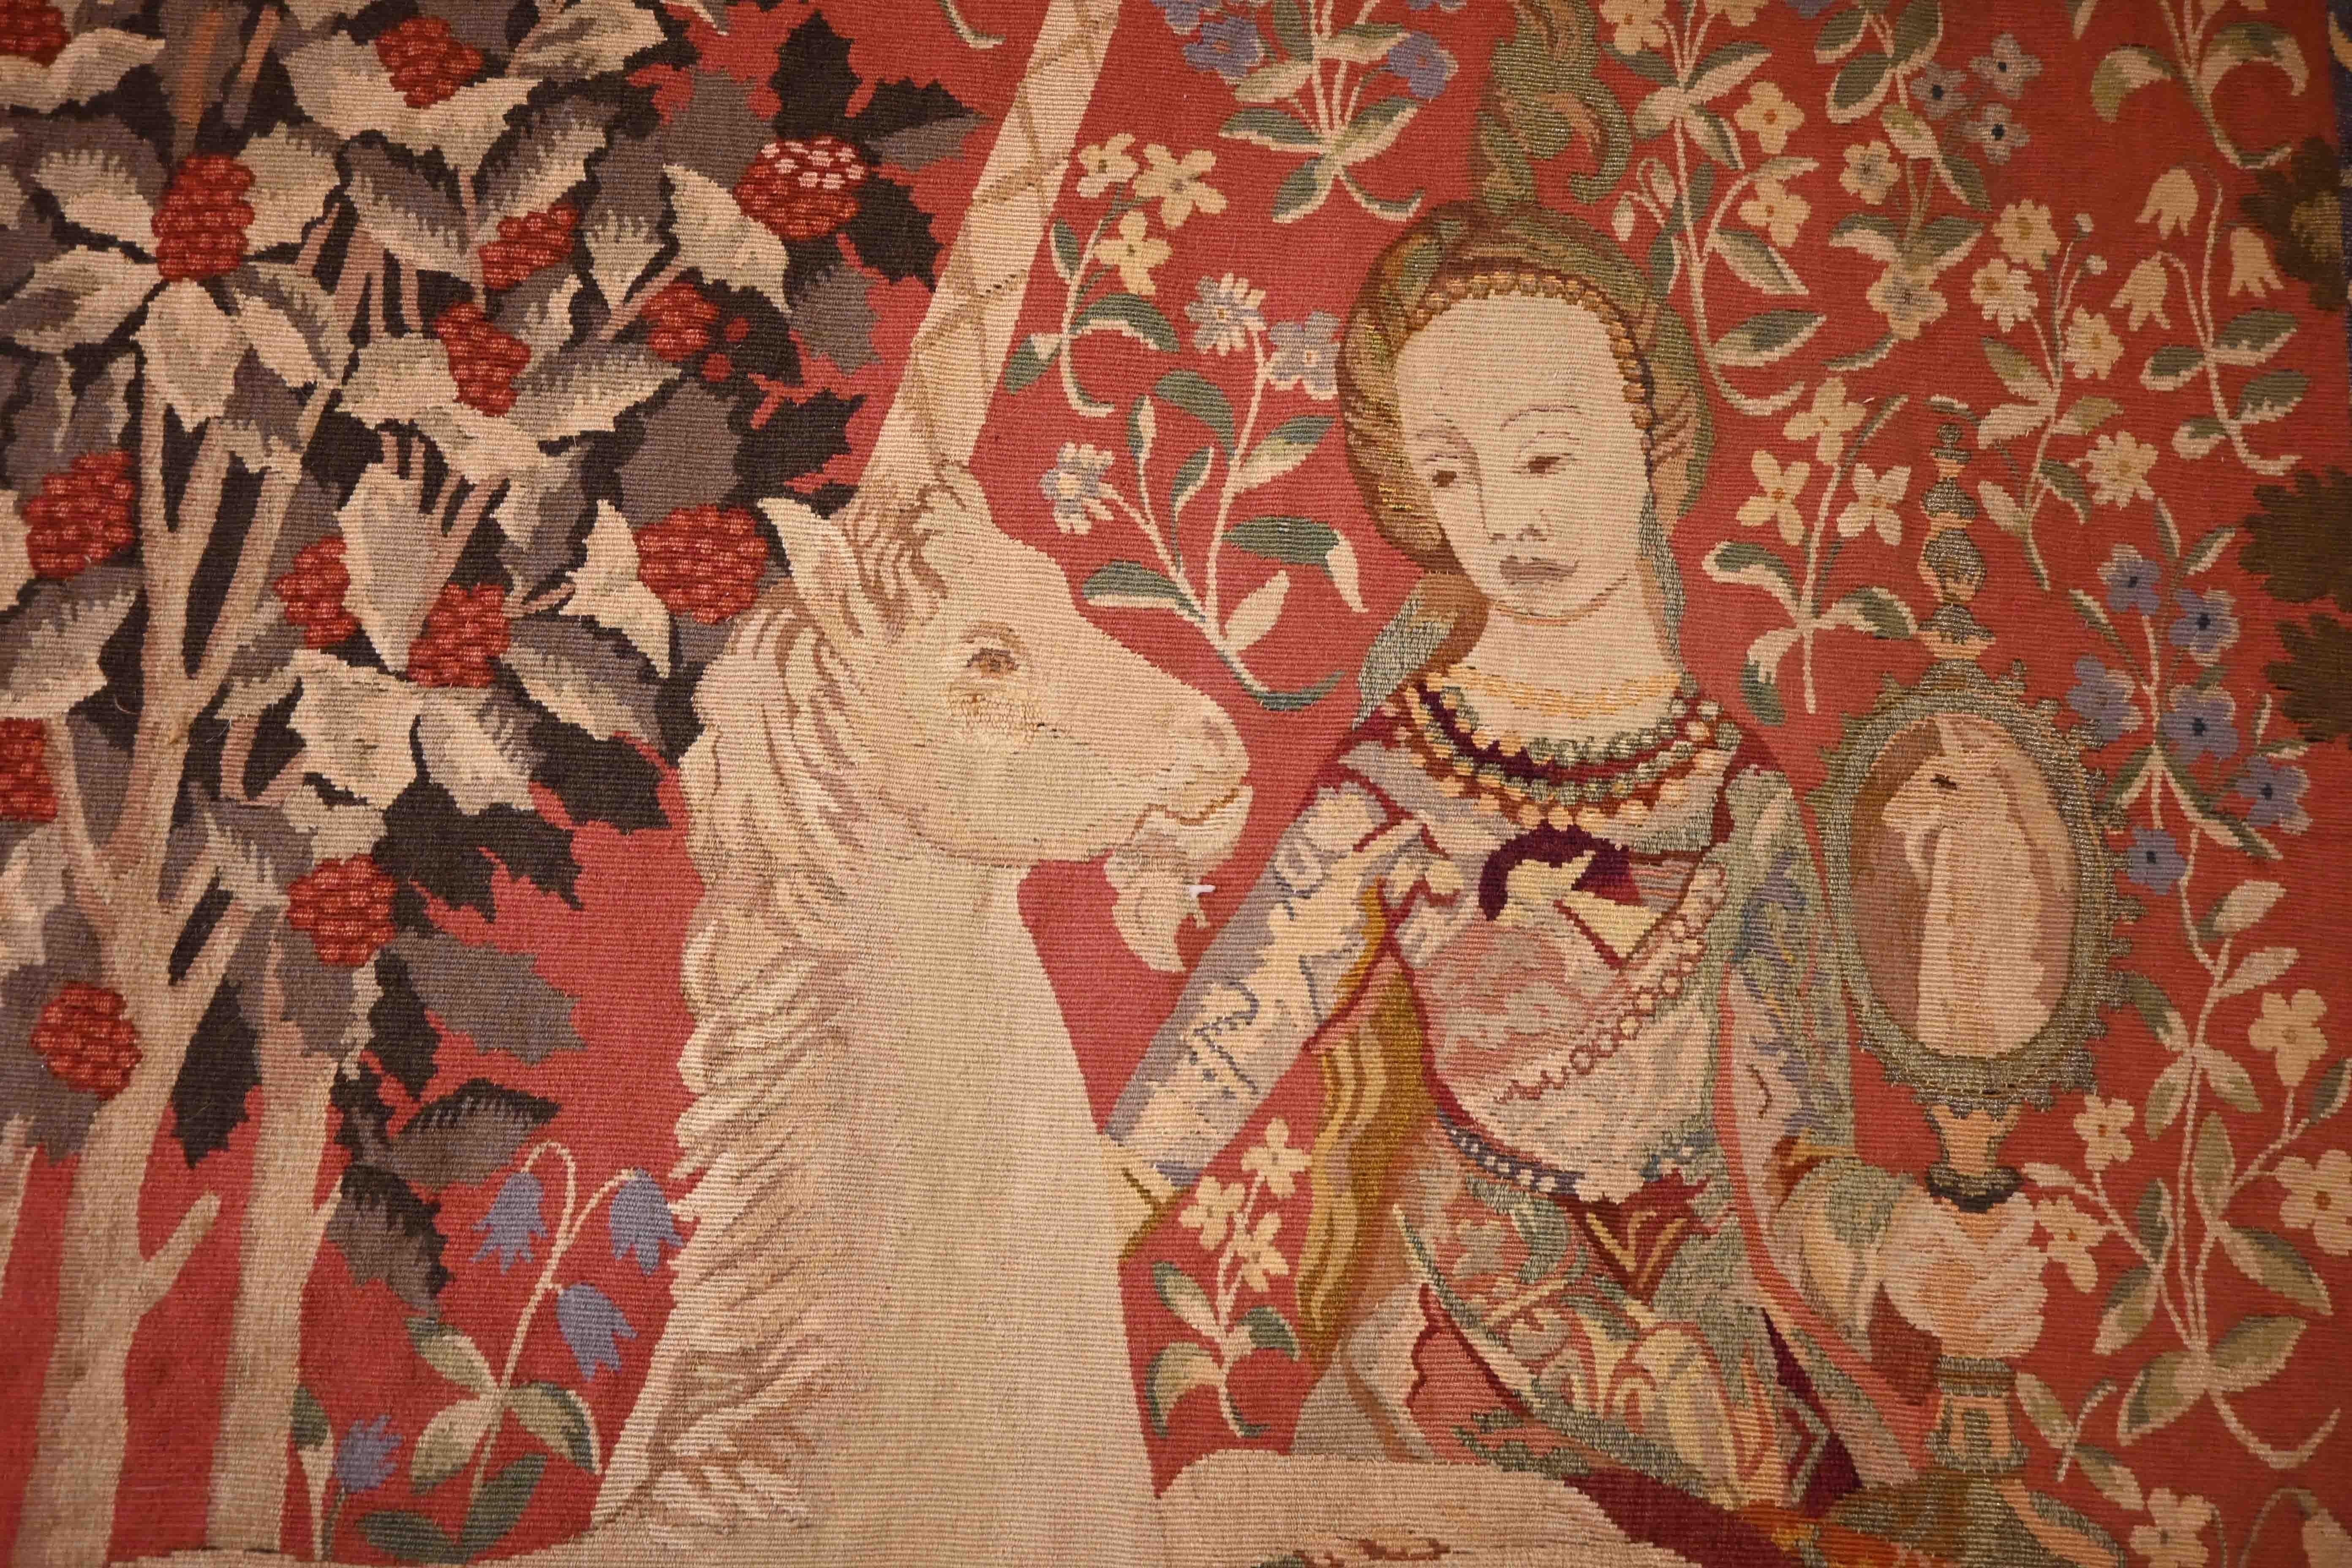 Dame à la licorne - Medieval tapestry Manufacture Aubusson 19th - N° 1355 For Sale 2